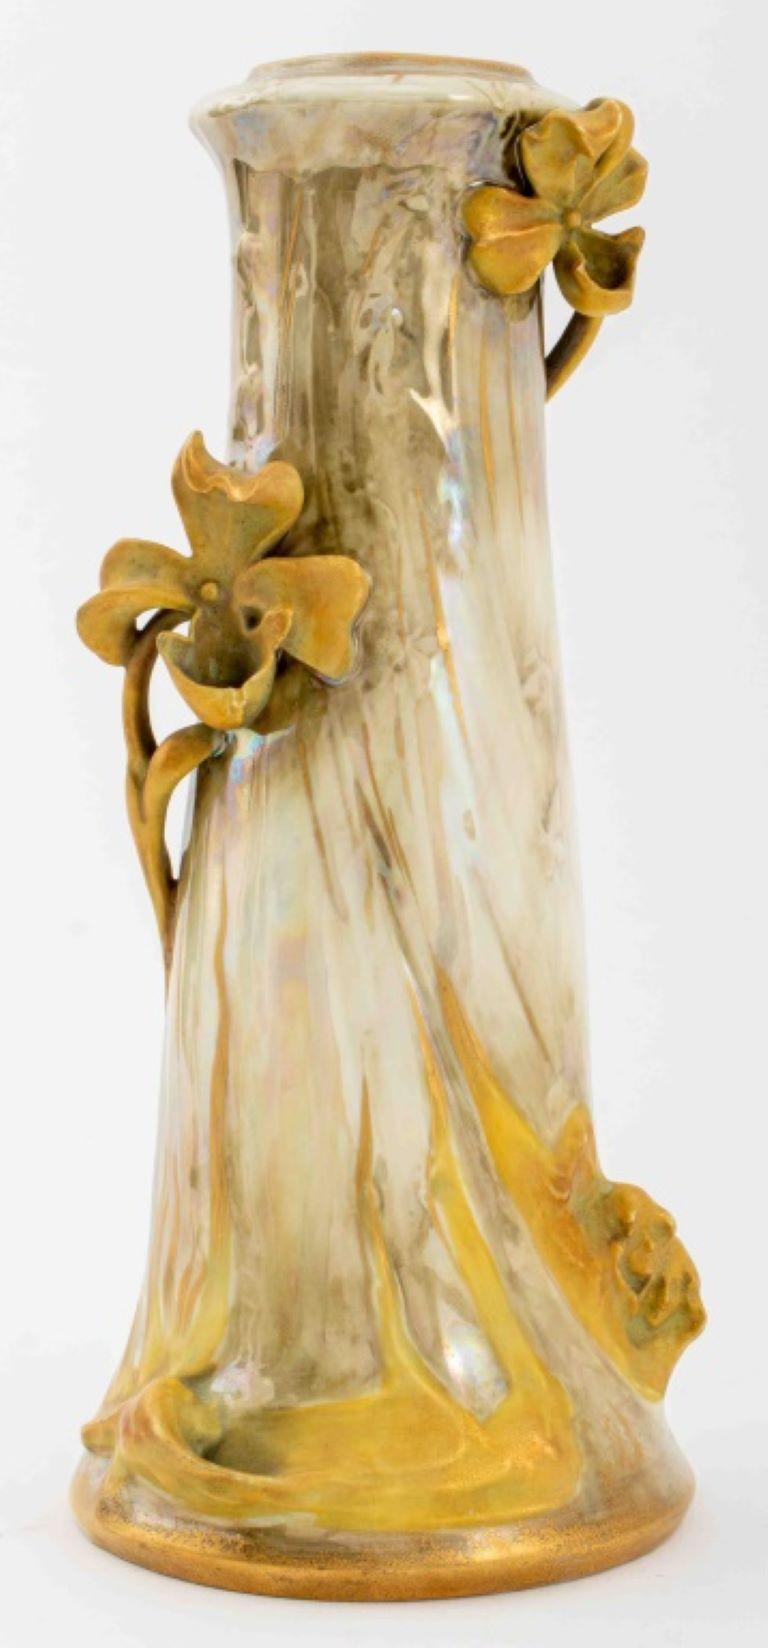 Turn-Teplitz Amphora Austrian ceramic pottery vase, circa 1900, of tapering cylindrical form with conforming sinuous flowering vine handles and a lobed flare lip, glazed with a combination of earth tone matte and iridescent colors with hints of pink